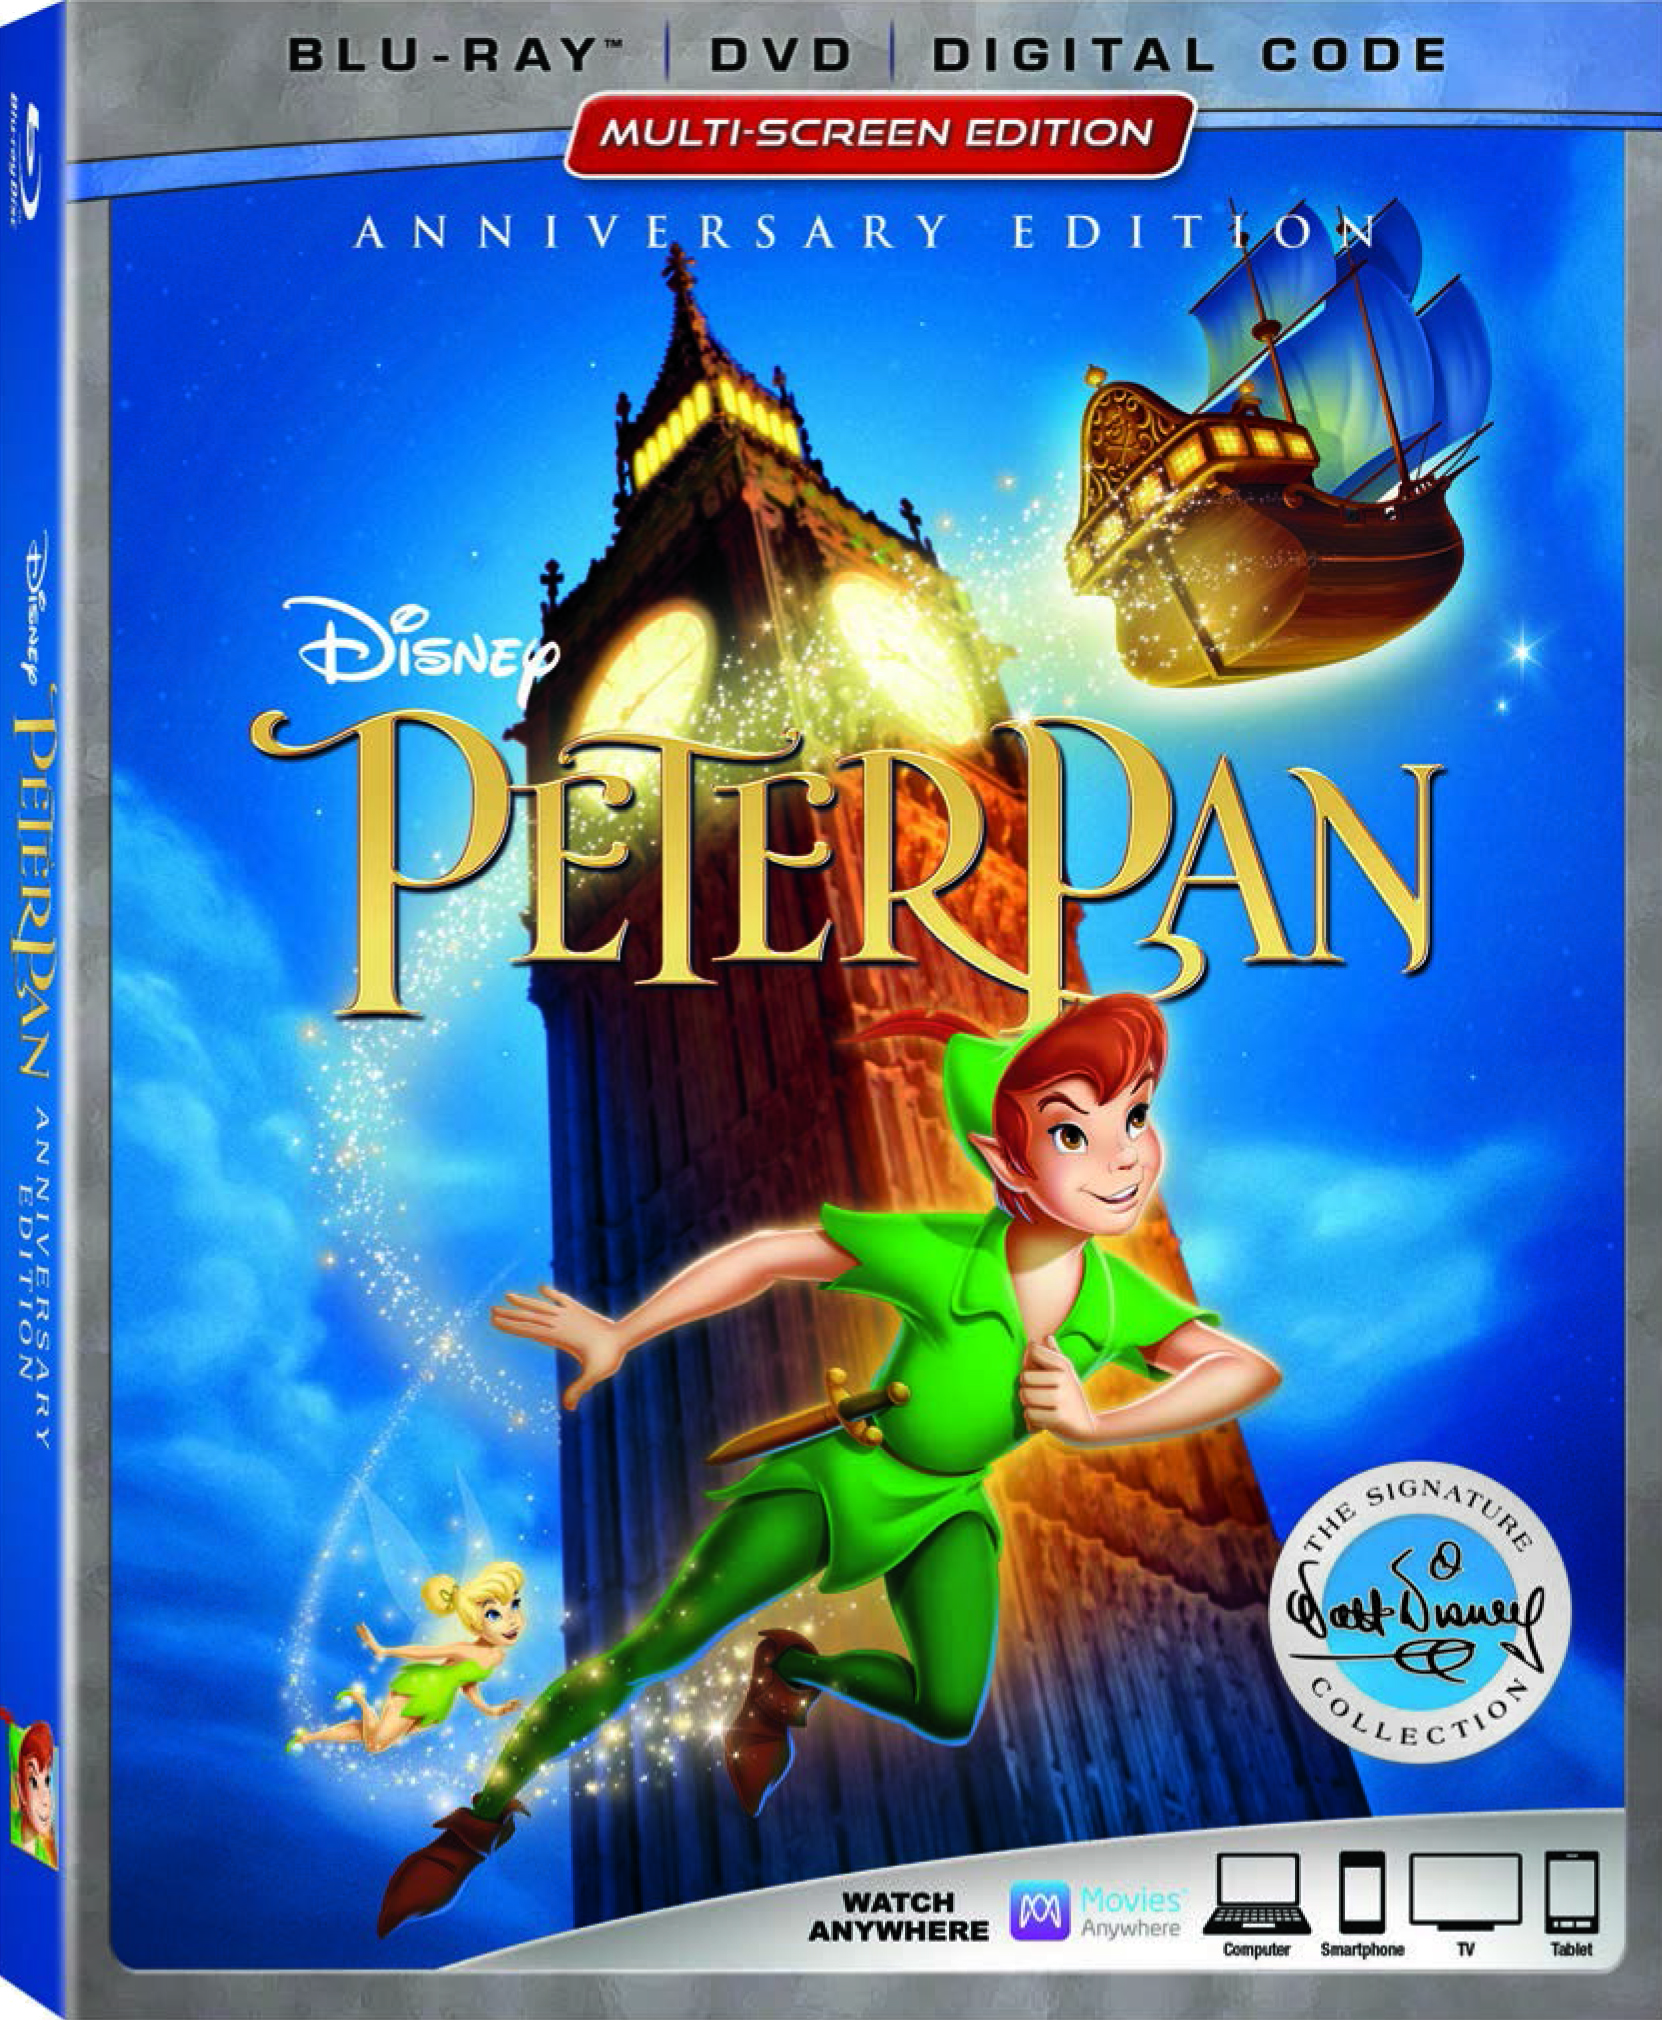 anthony gotti recommends Peter Pan Movie Download